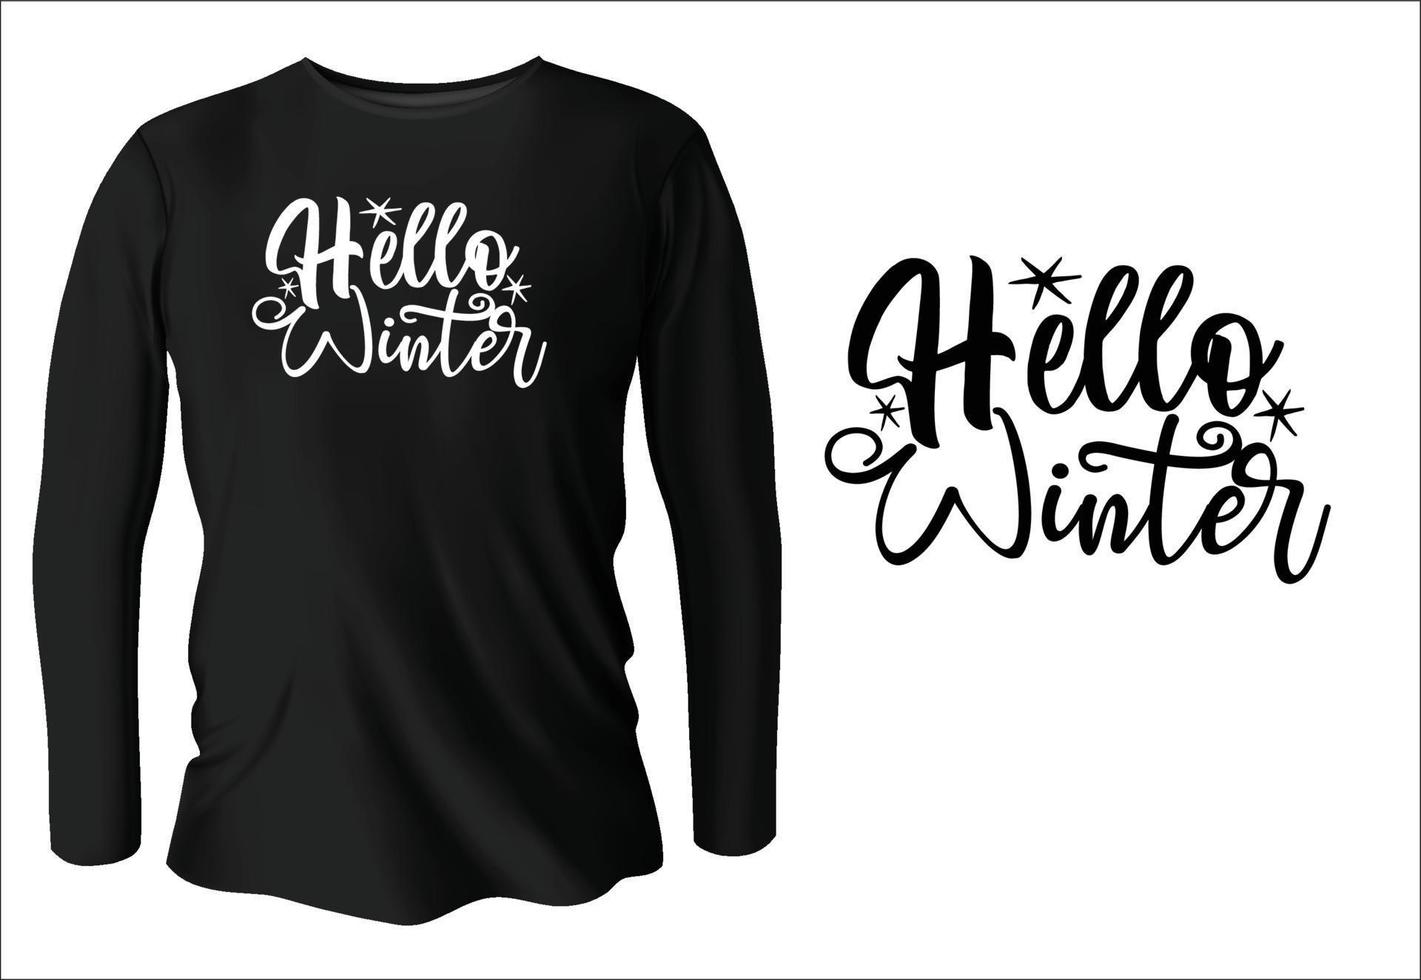 hello winter t-shirt design with vector